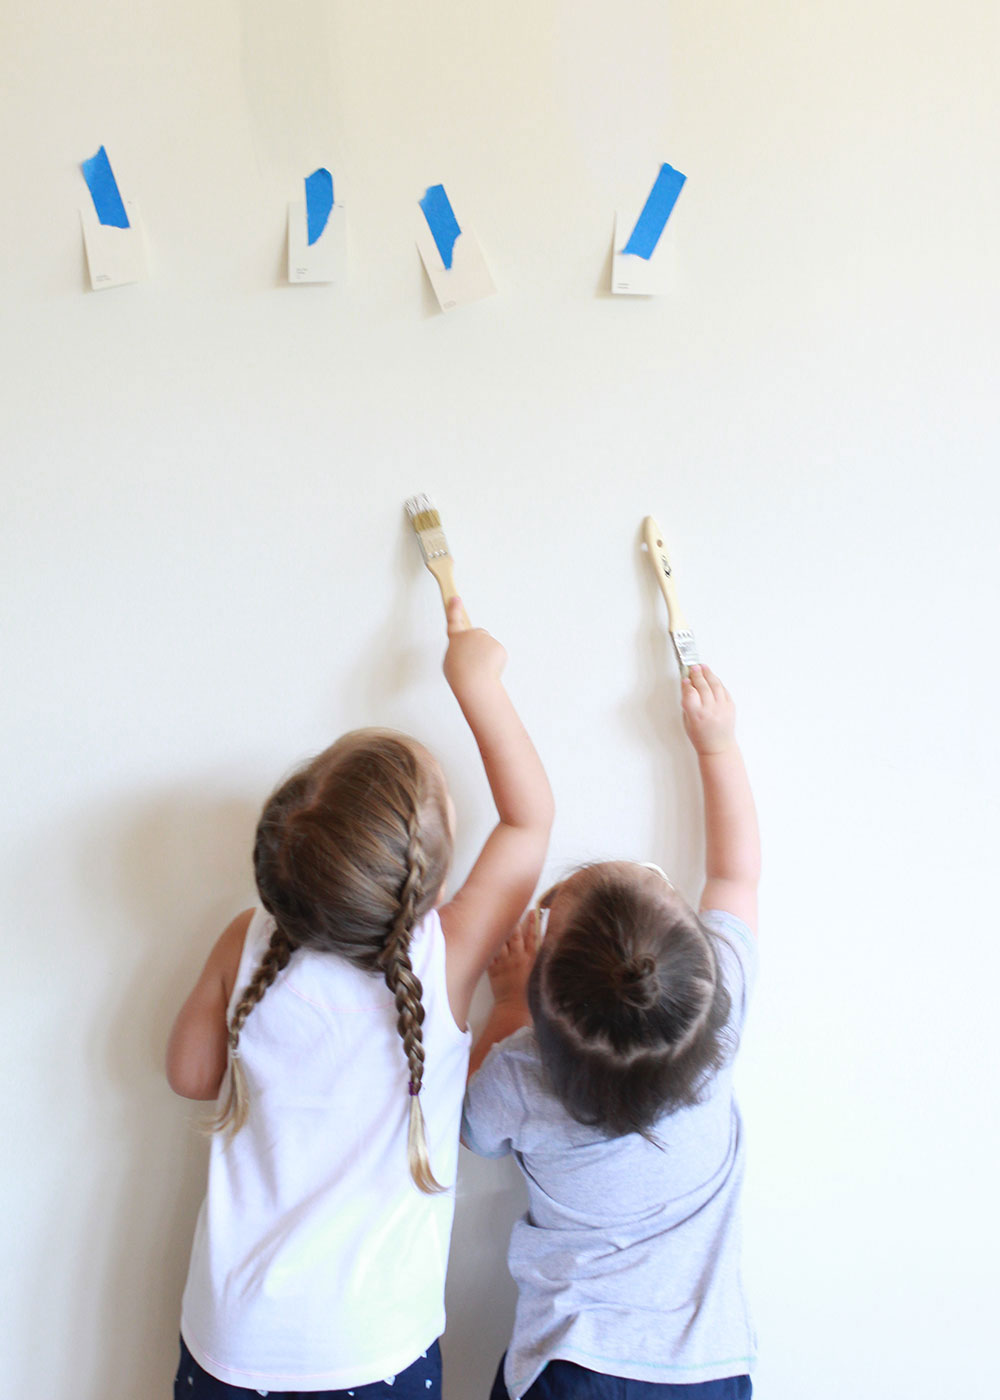 new house update. these little helpers picking paint colors | thelovedesginedlife.com